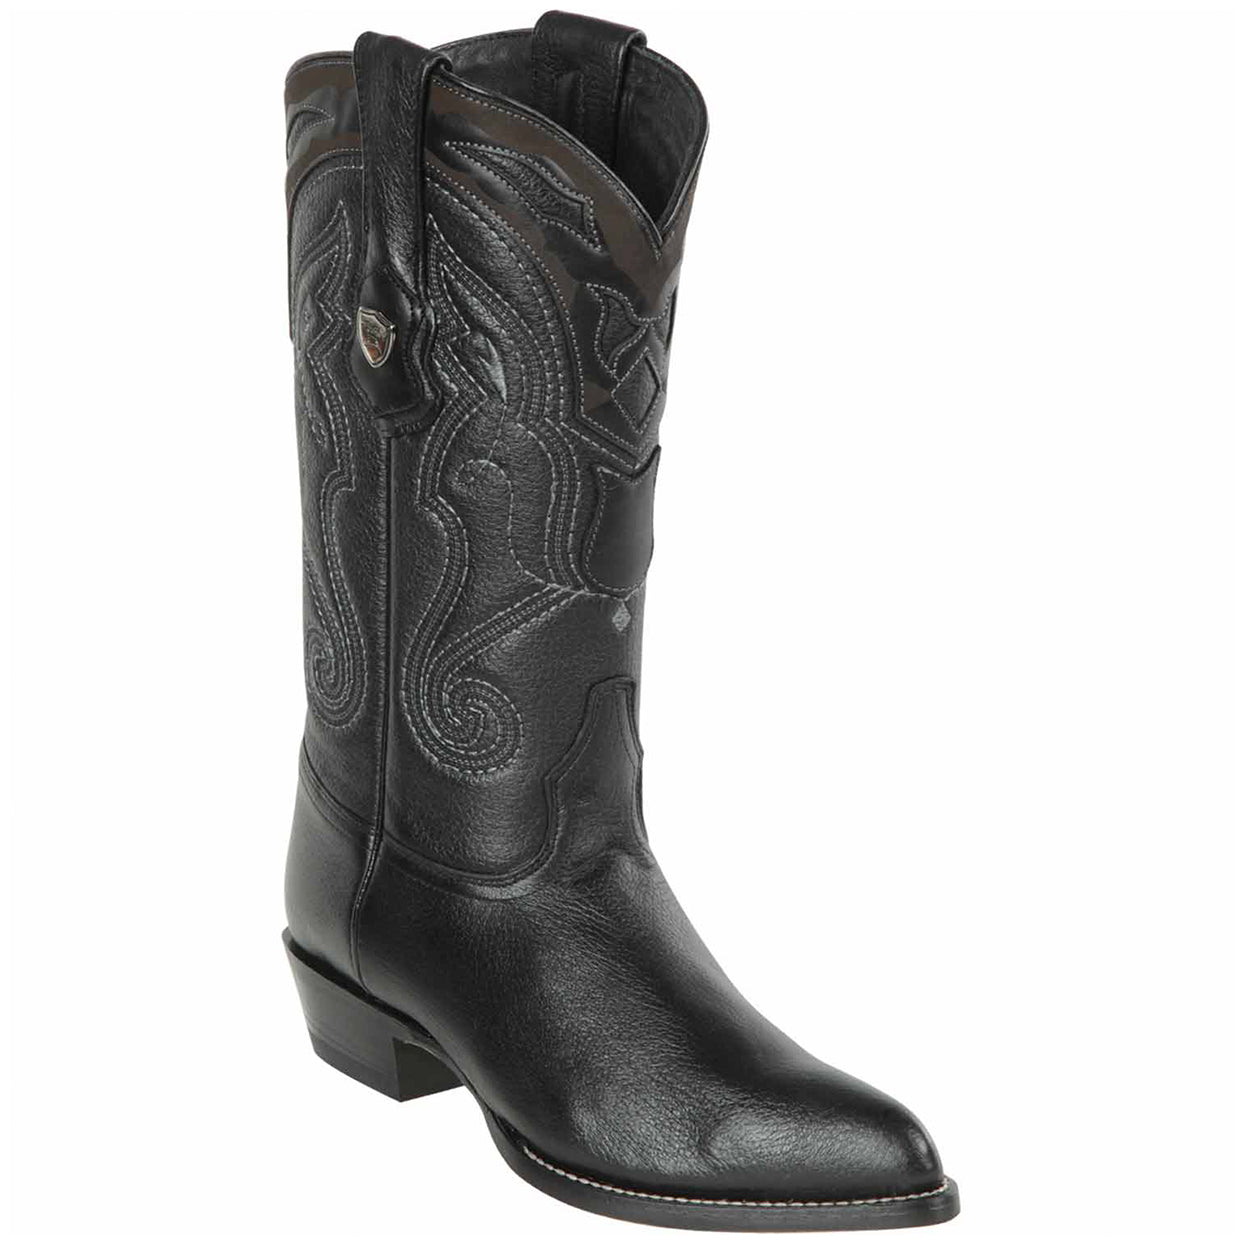 Wild West Boots - Deer Leather Mens Black Western Boots